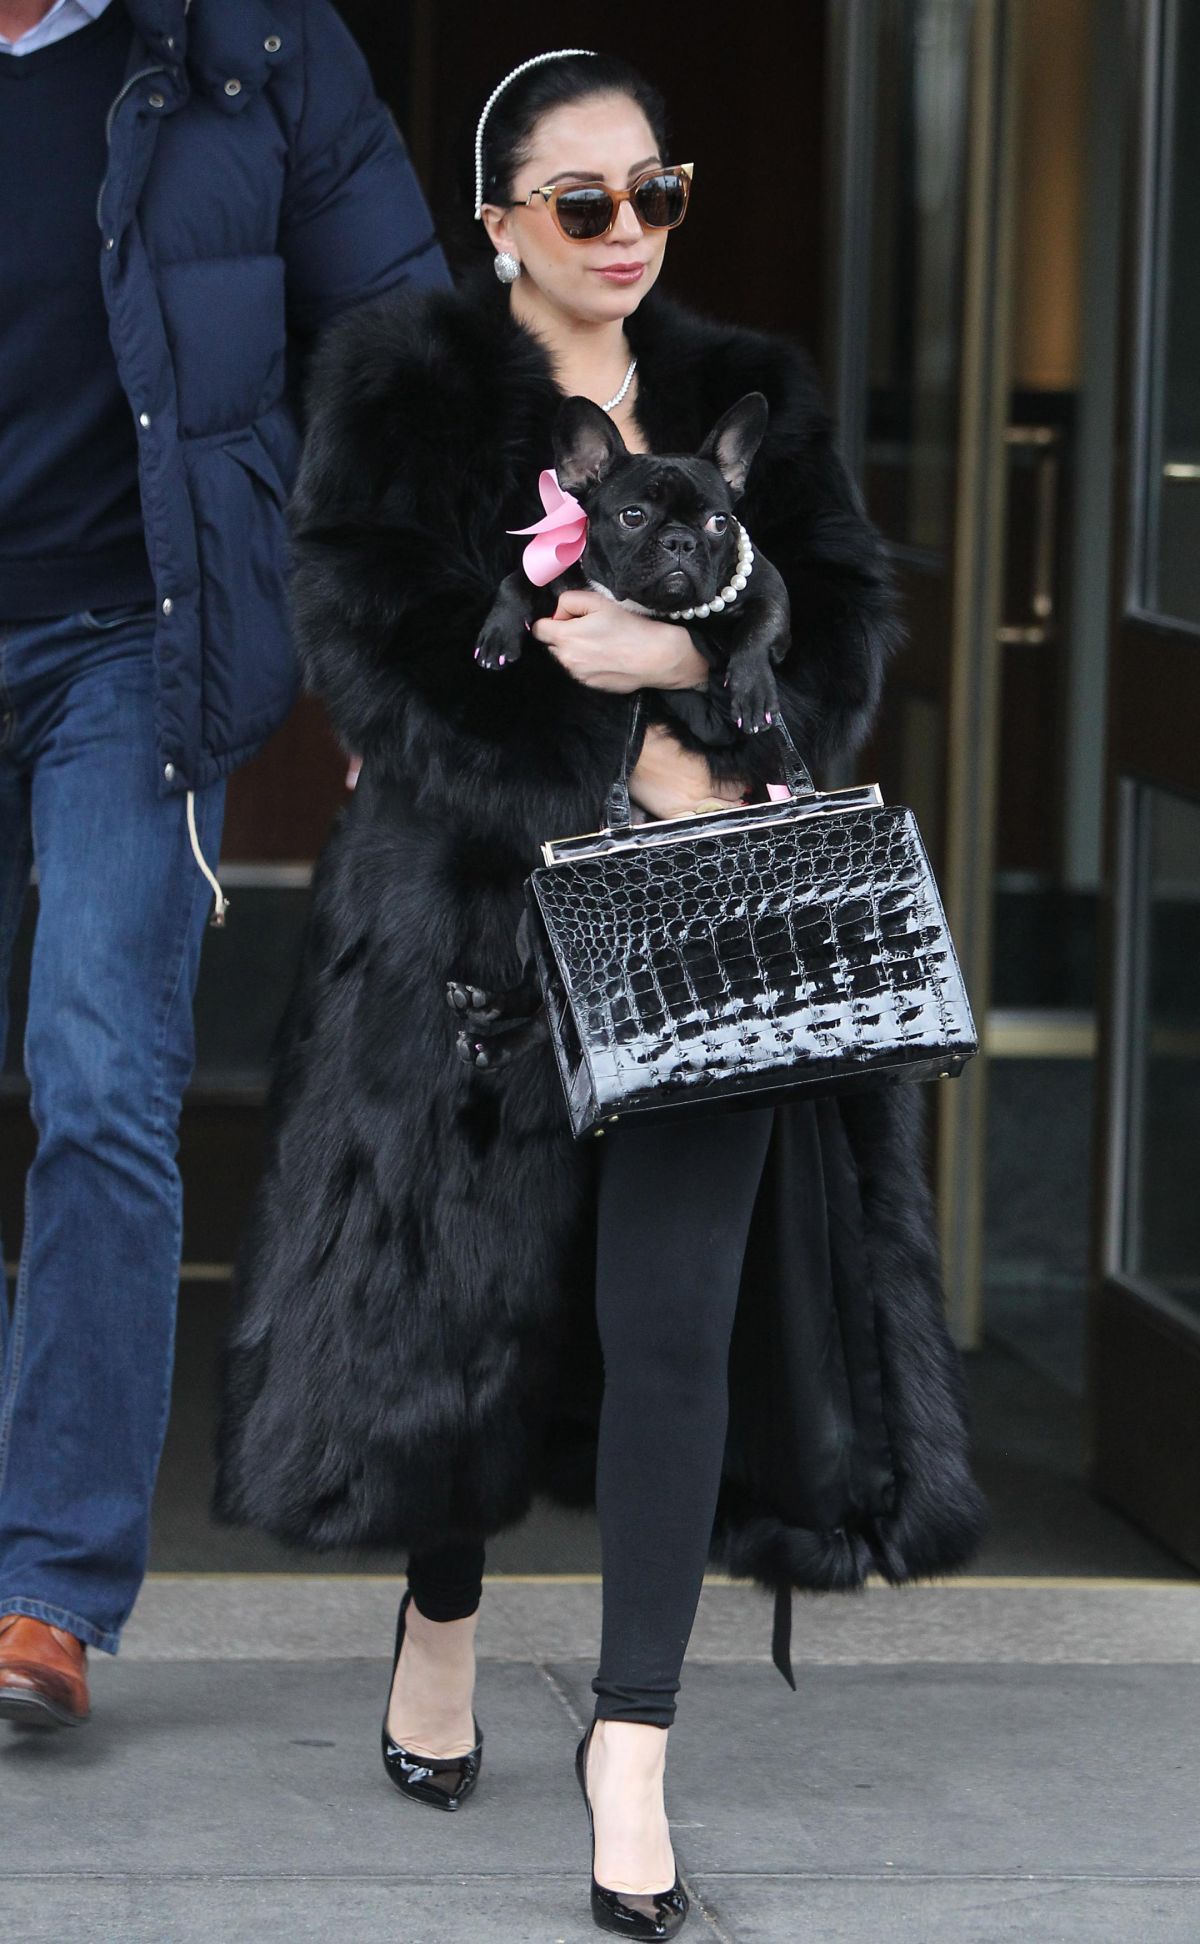 LADY GAGA in Fur Coats Leaves Her Apartment in New York – HawtCelebs